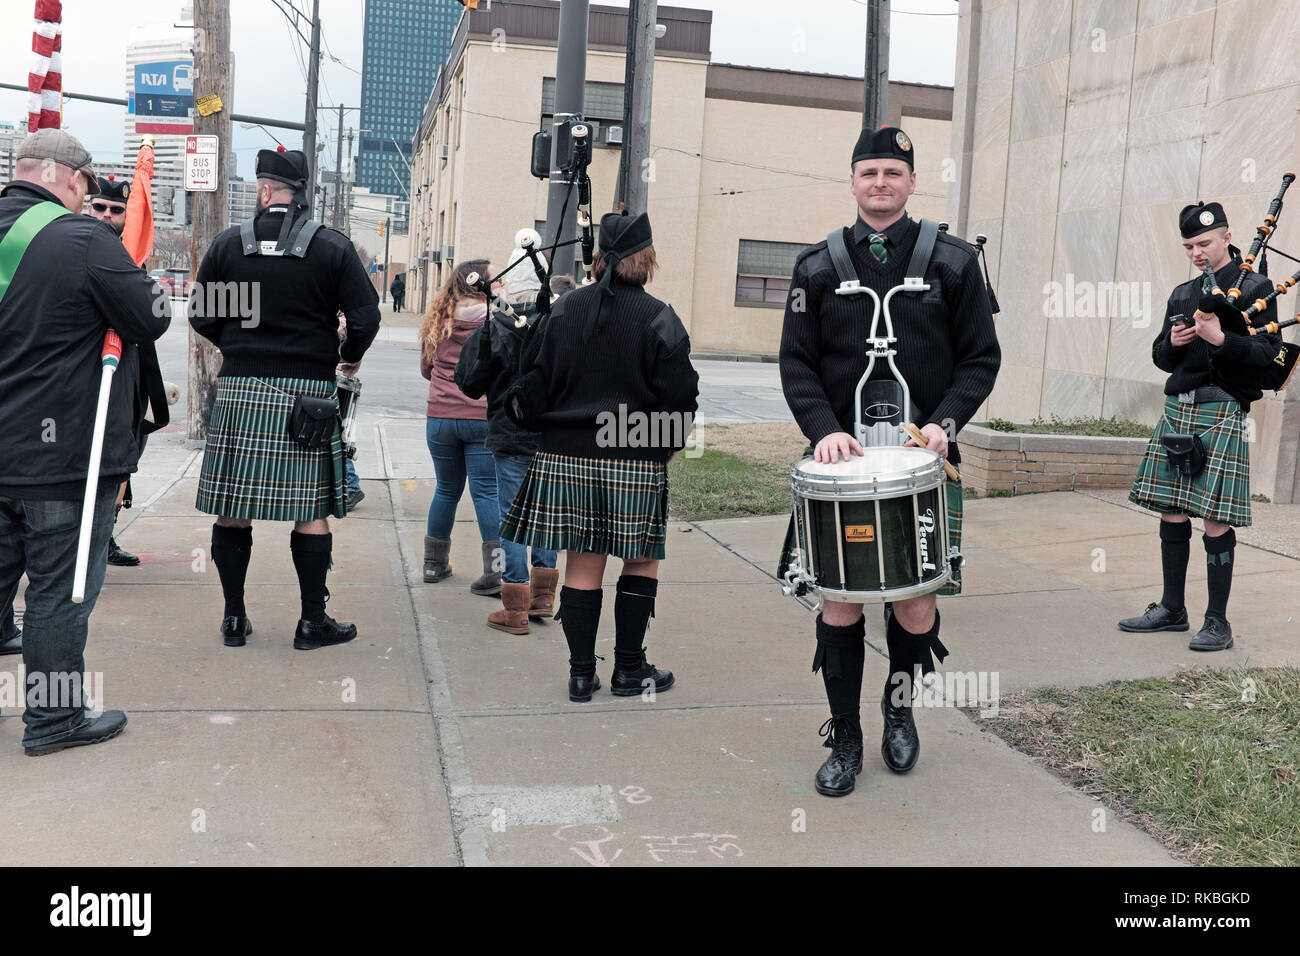 Irish band in kilts warms up prior to participating in the 2017 St. Patrick's Day Parade in downtown Cleveland, Ohio, USA. Stock Photo